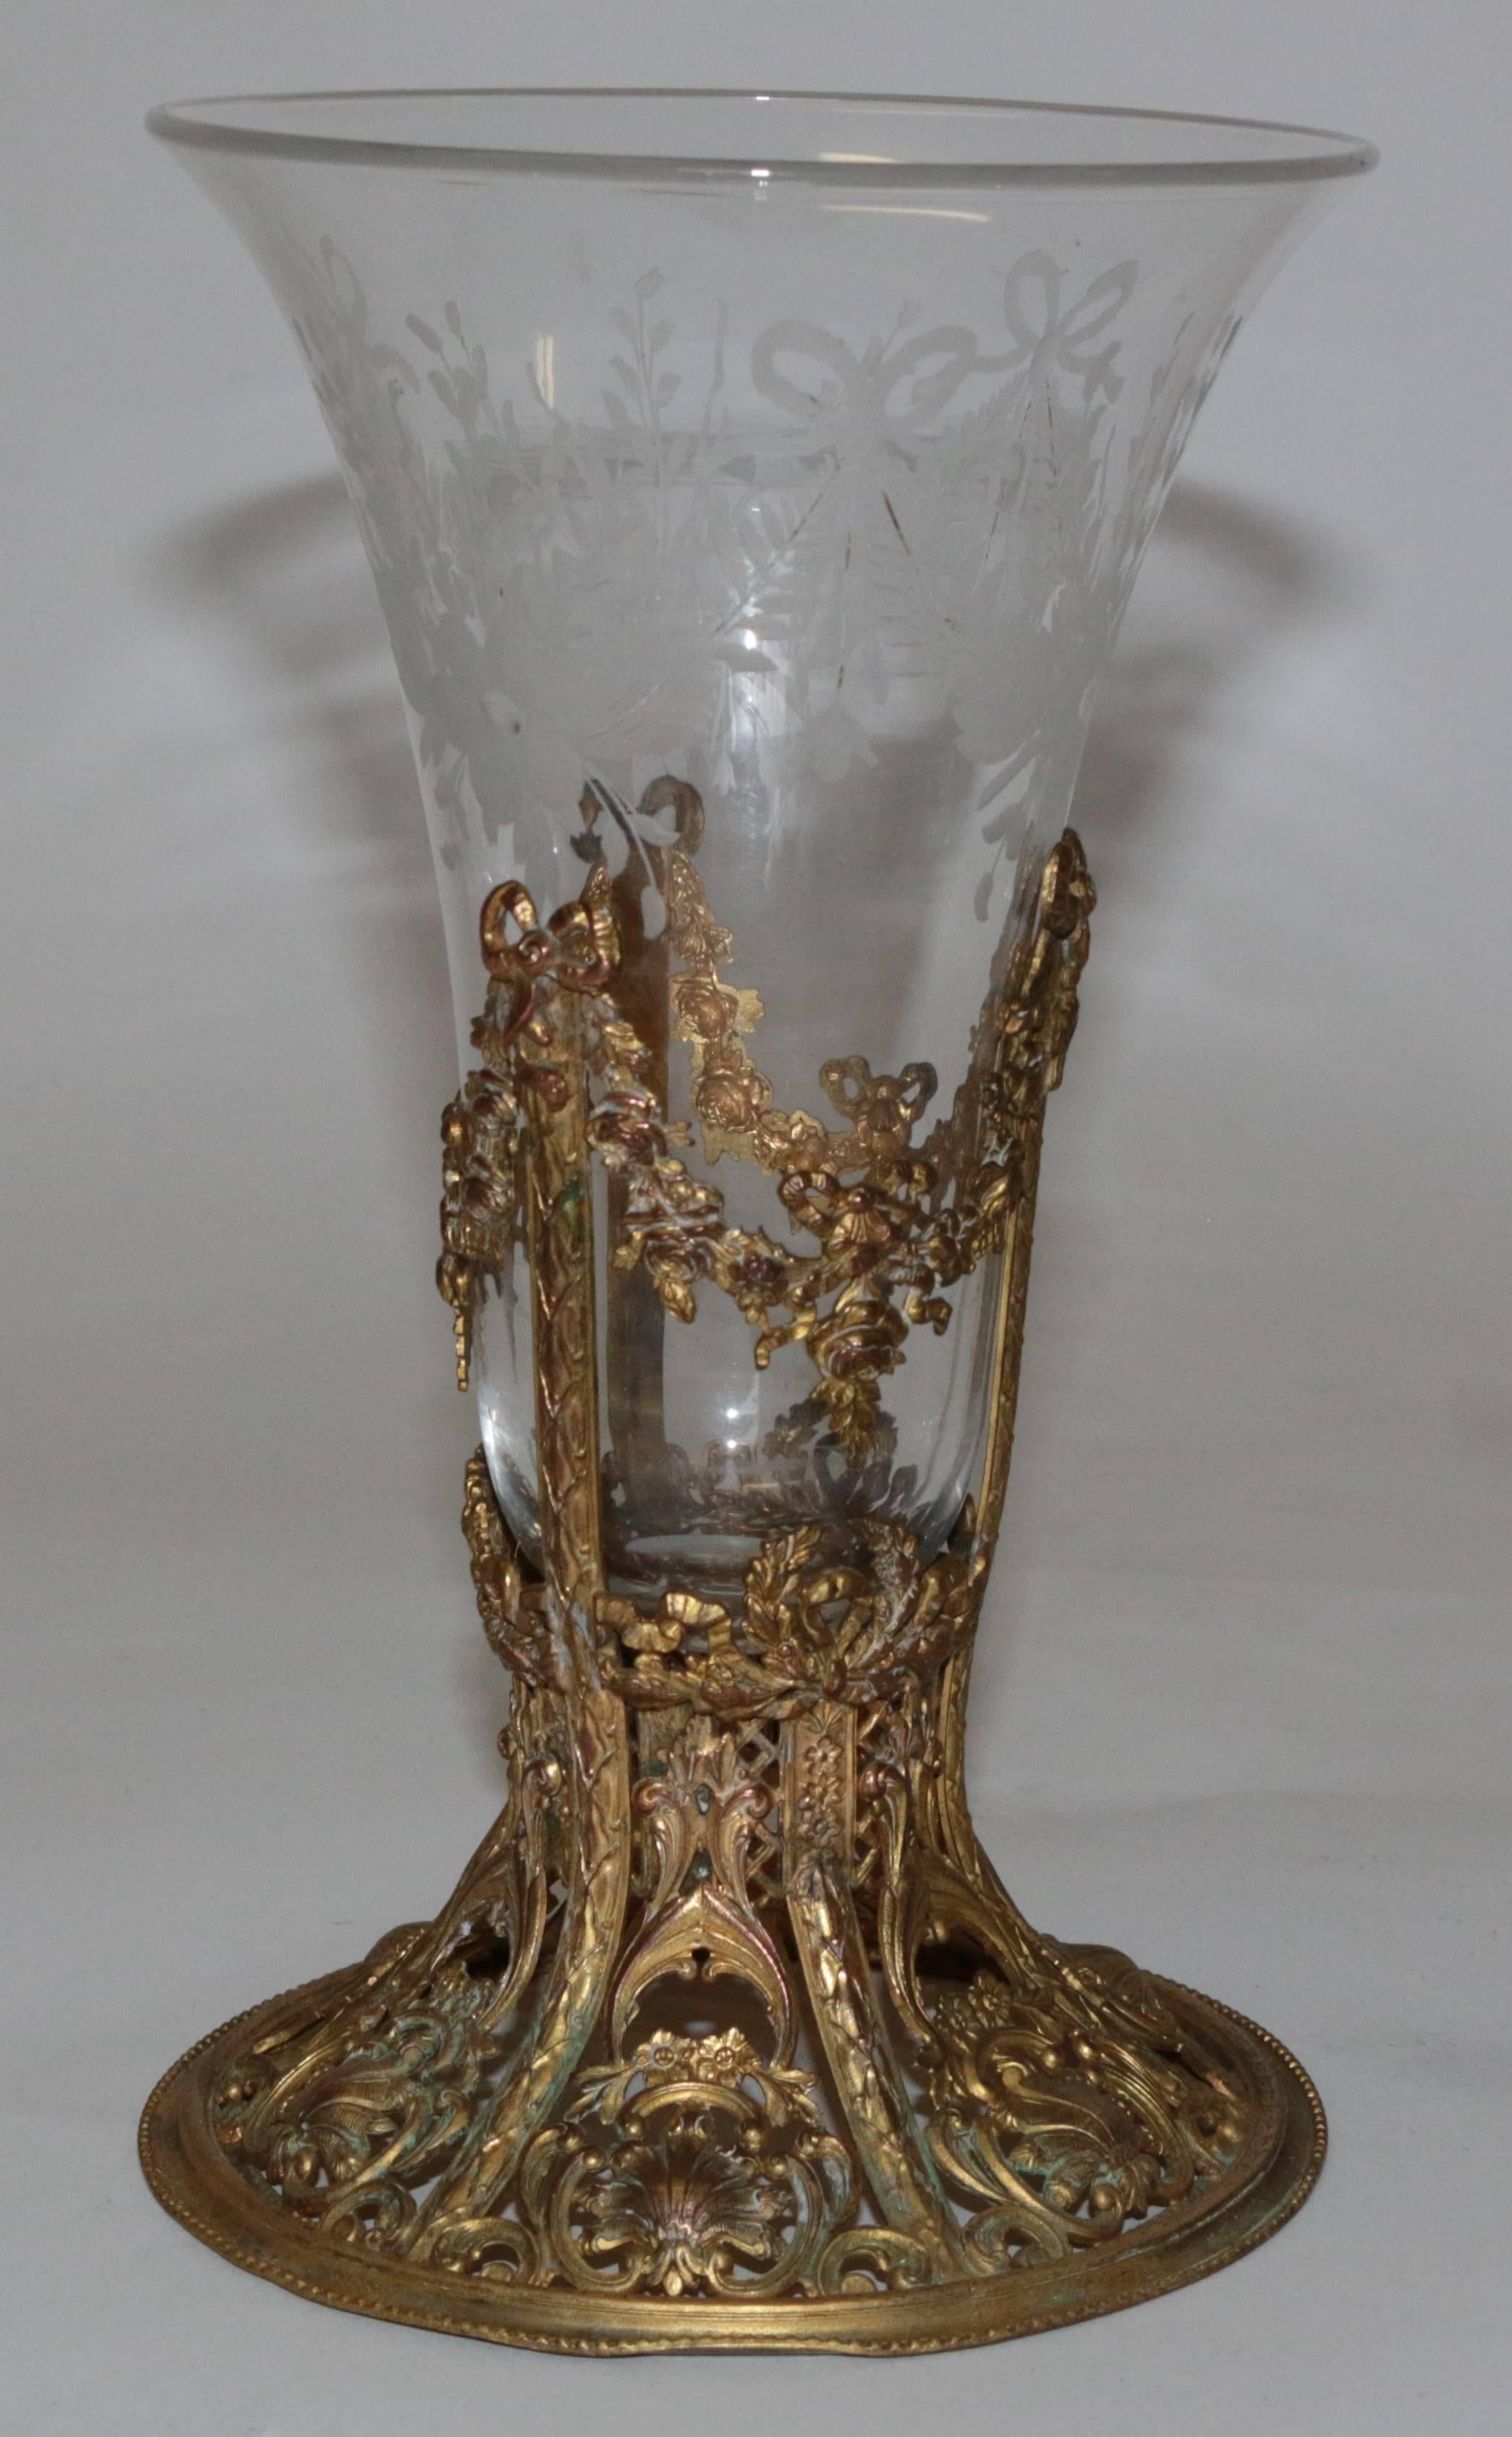 This great etched blown glass and ormolu base are in pristine condition. The ormolu base has amazing detail with ribbons at the top of the base extending through rose vines. There are shells at the bottom of the base giving it a great festooned look.